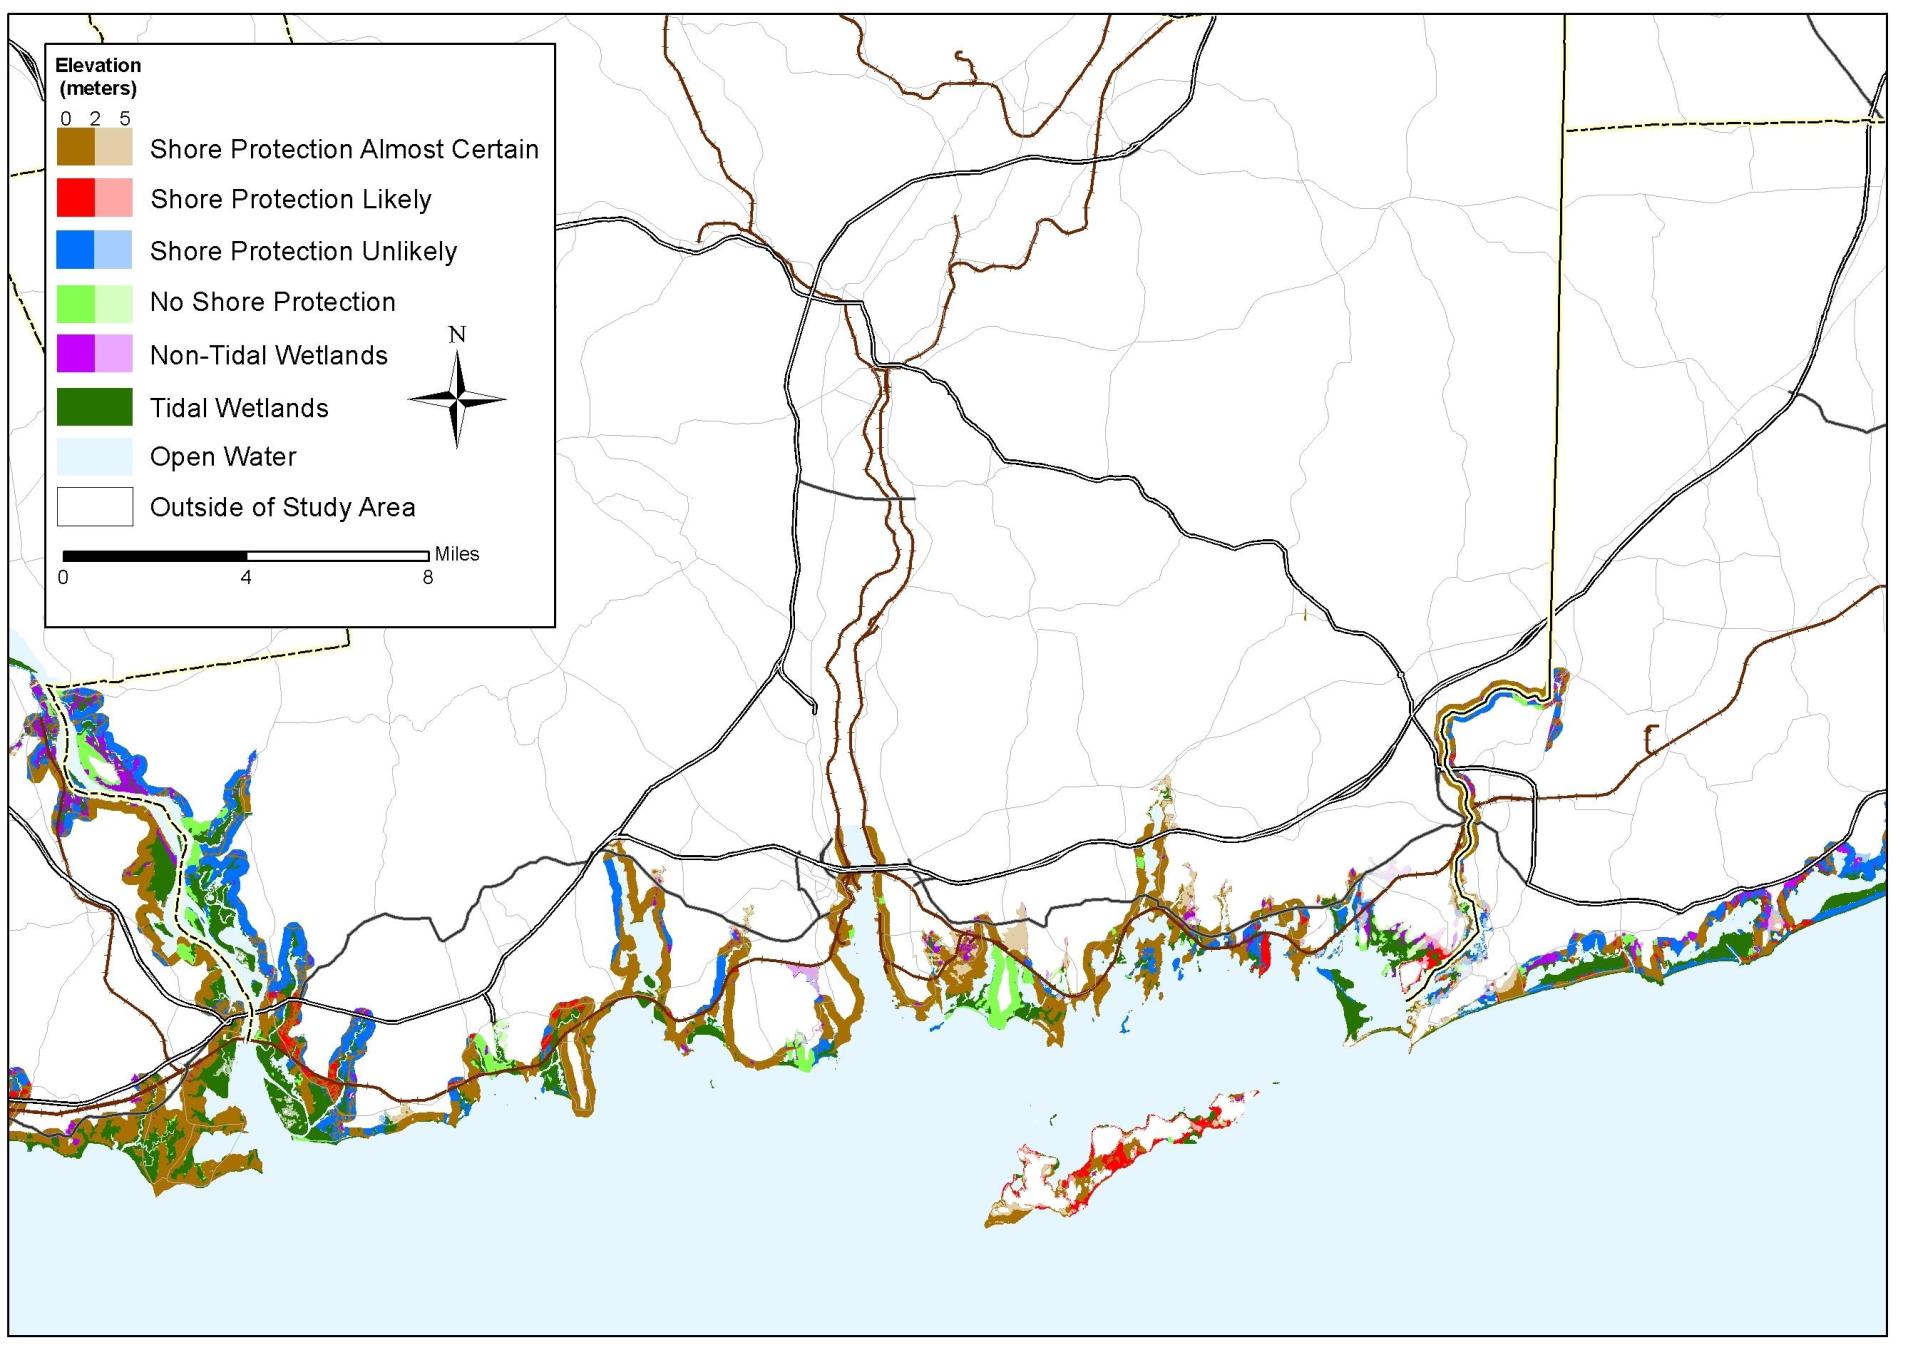 New London, Connecticut sea level rise planning map